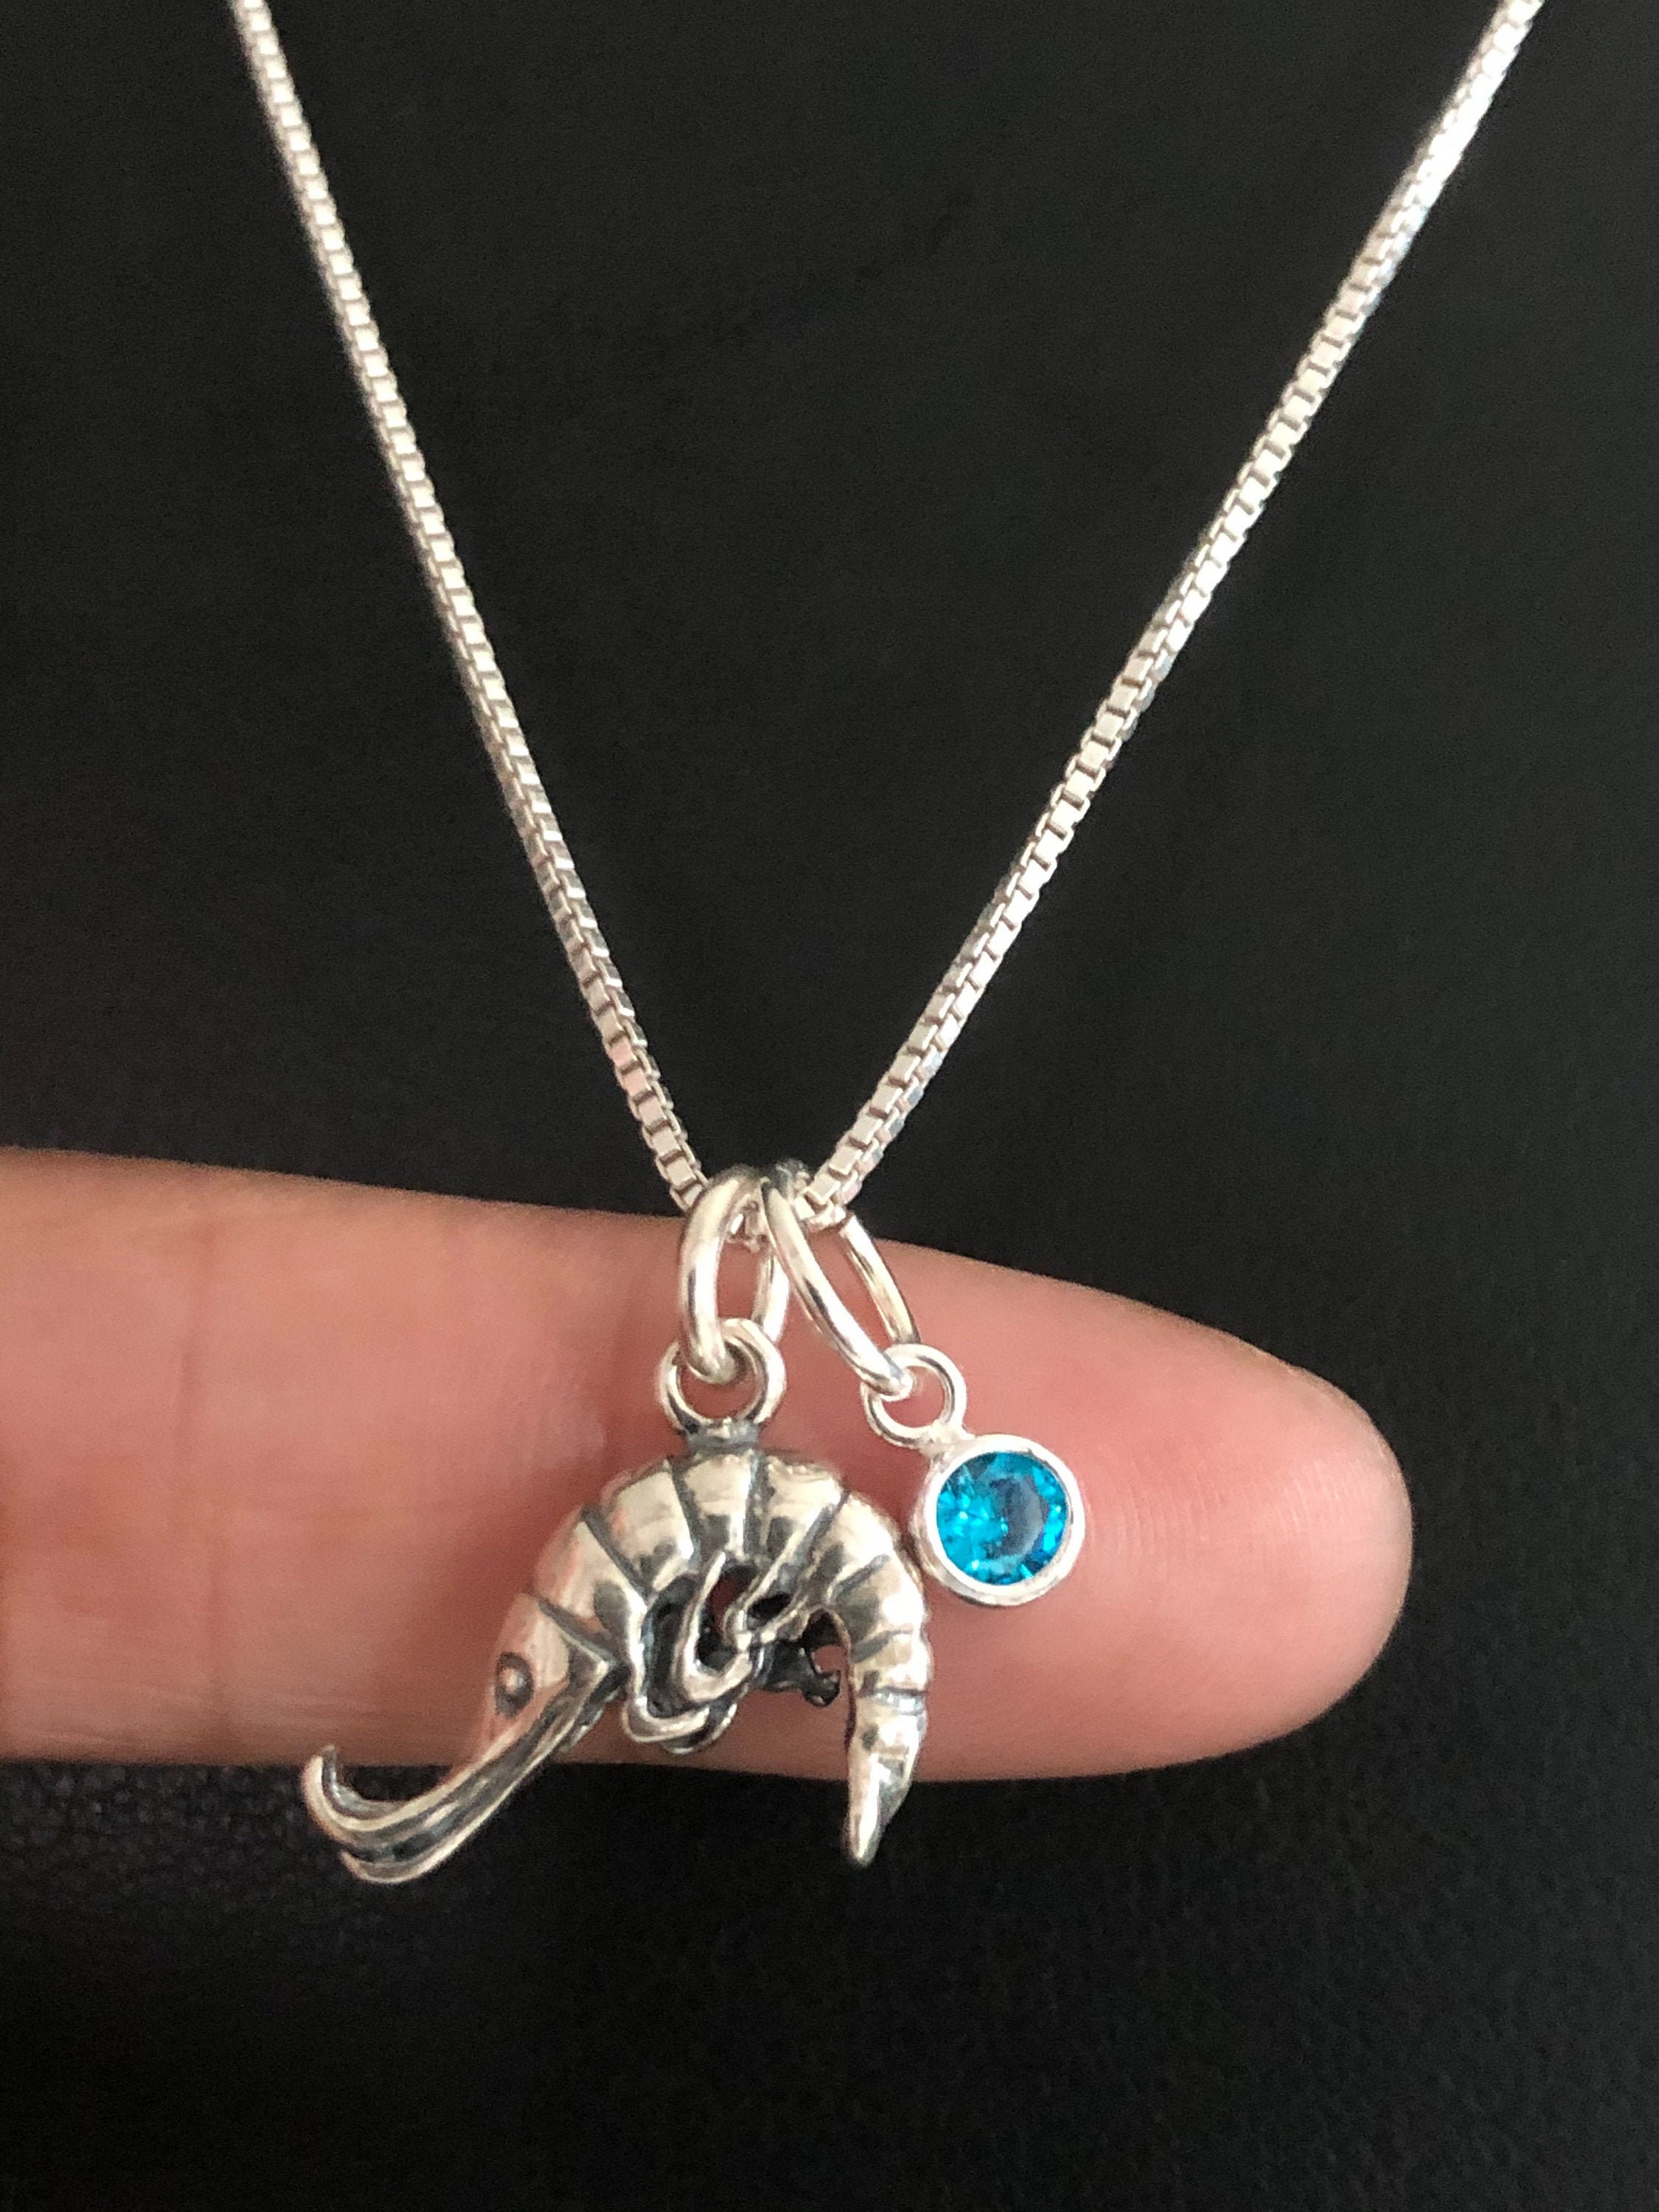 Shrimp Necklace, Sterling Silver Pendant, Family Birthstone Gift, Nautical Jewelry, Seafood Necklace